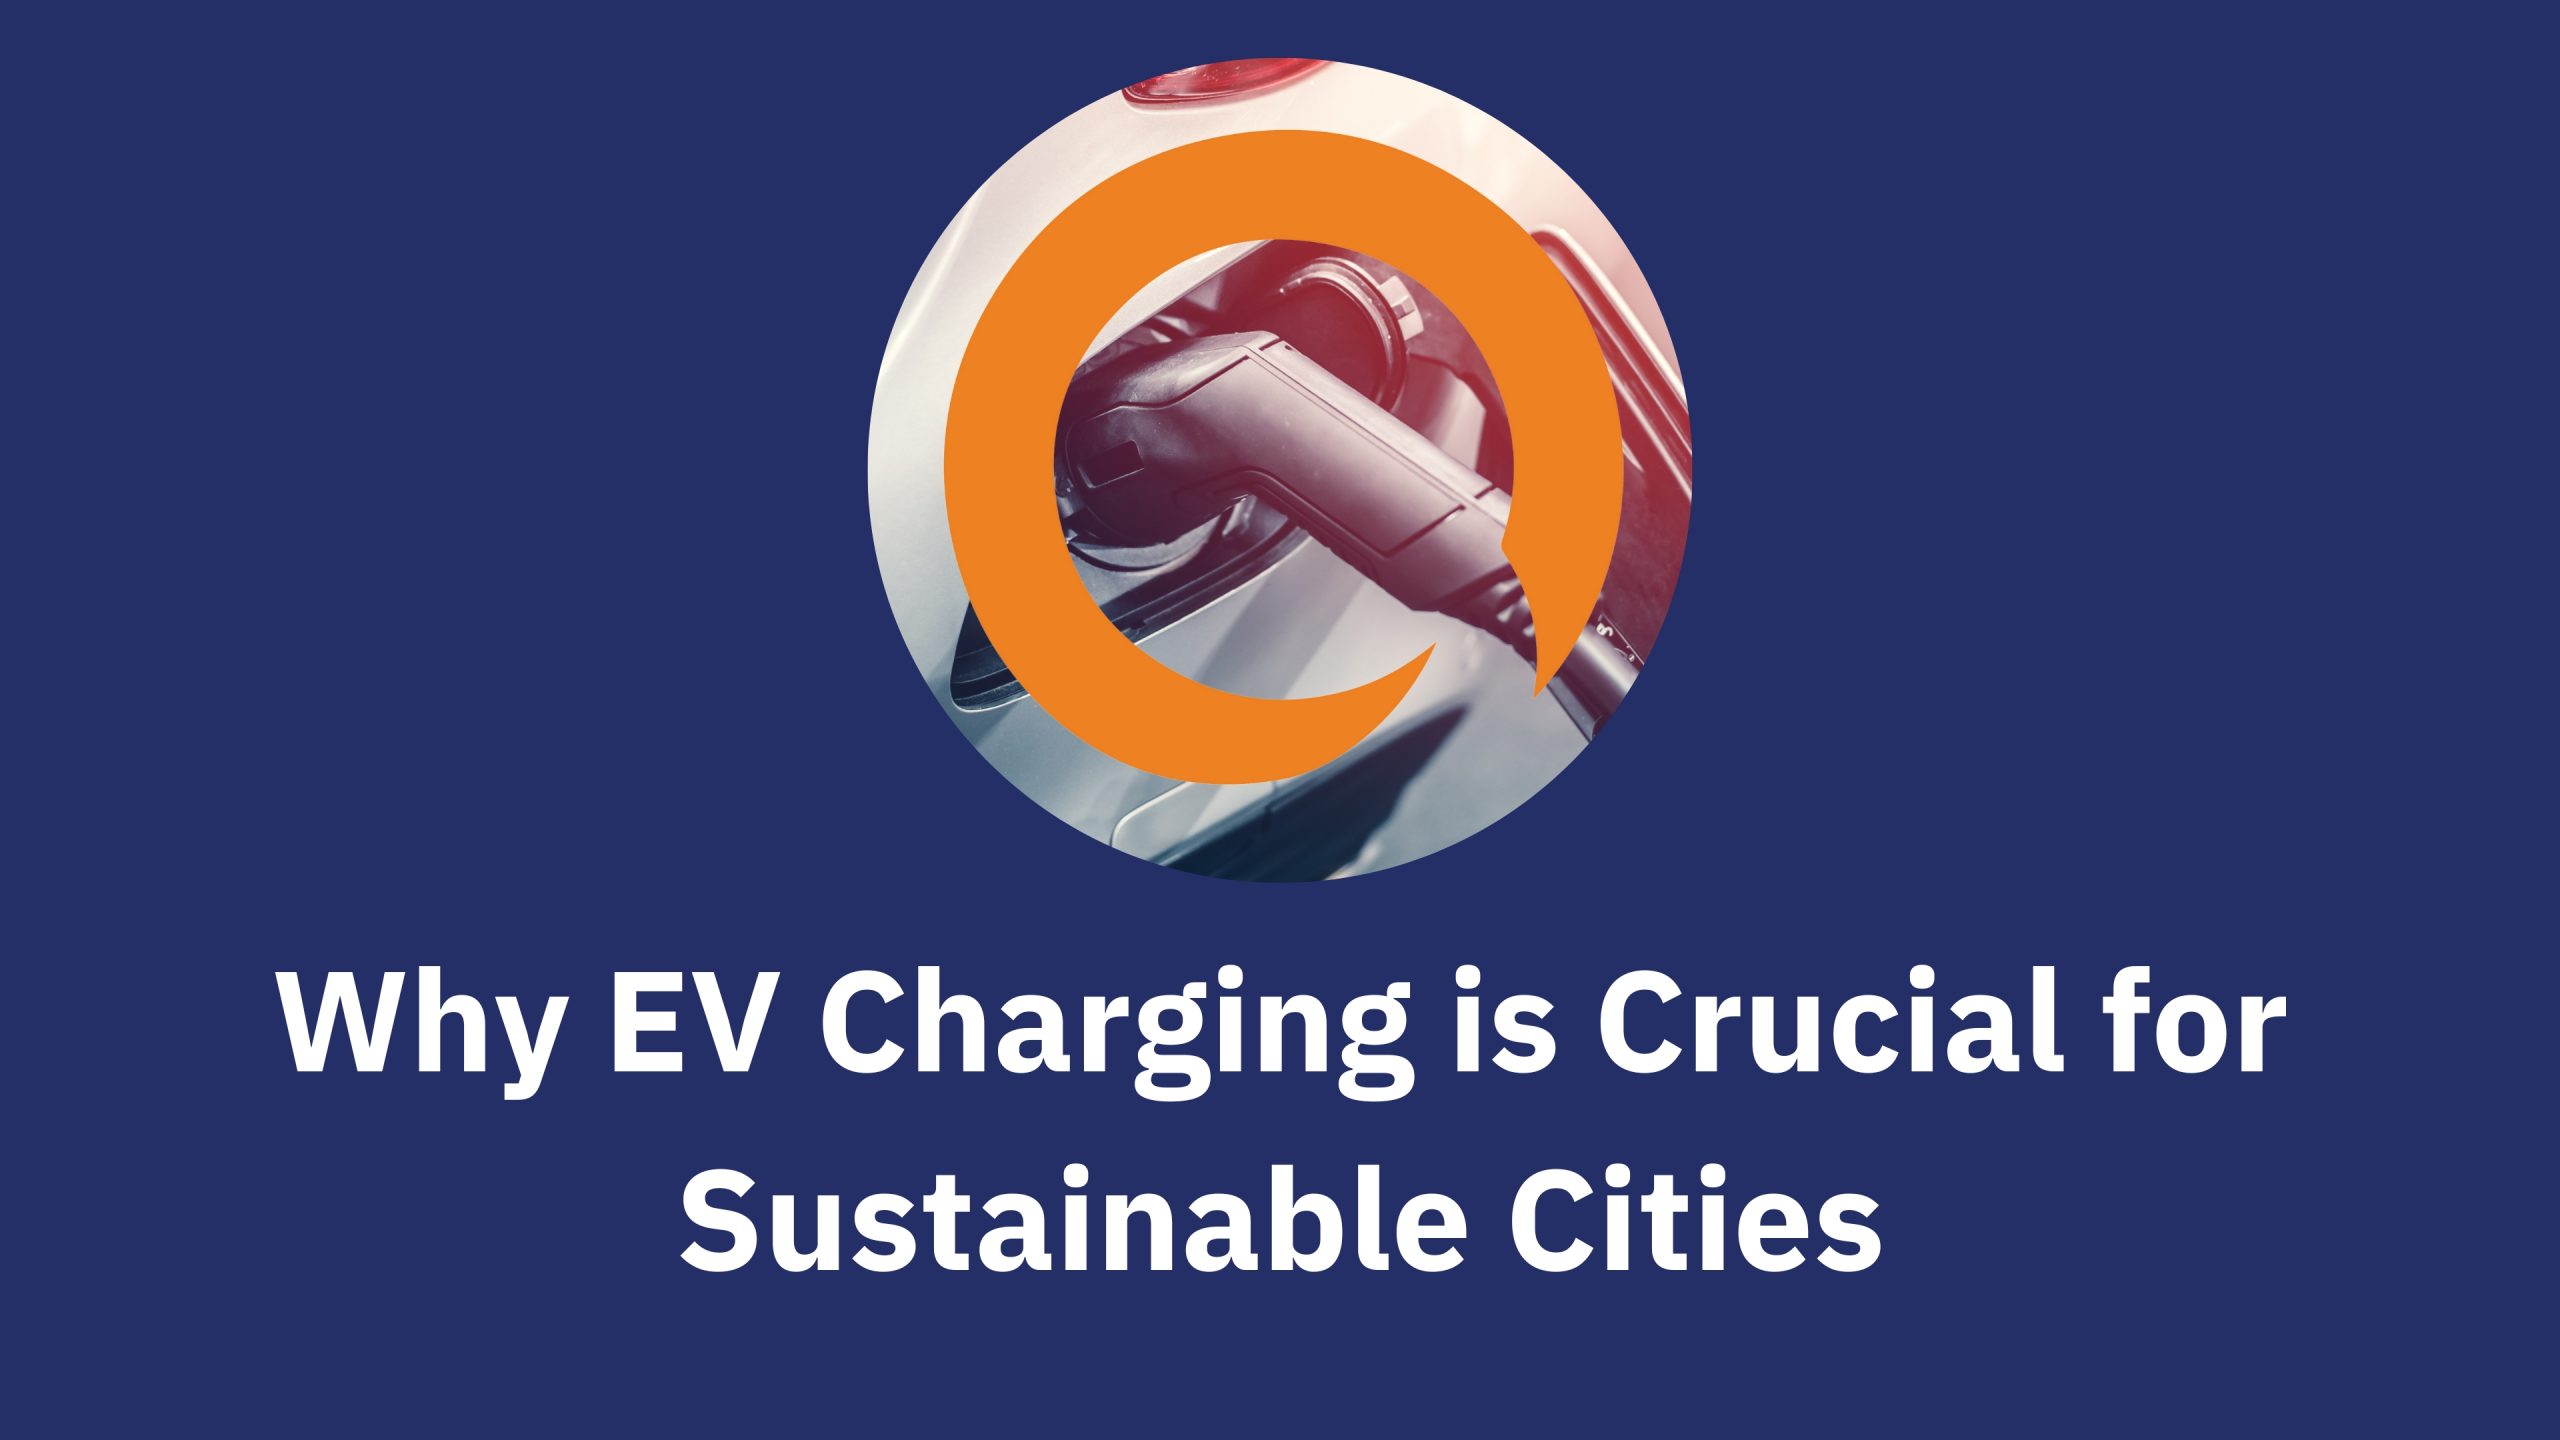 The artwork features an EV charger station with an electric vehicle parked and connected to the charger. The title of the article, "Why EV Charging is Crucial for Sustainable Cities: Exploring the Benefits of EV Charging Infrastructure and its Role in Reducing Carbon Emissions - Singapore Initiatives Included," is displayed prominently above the image.